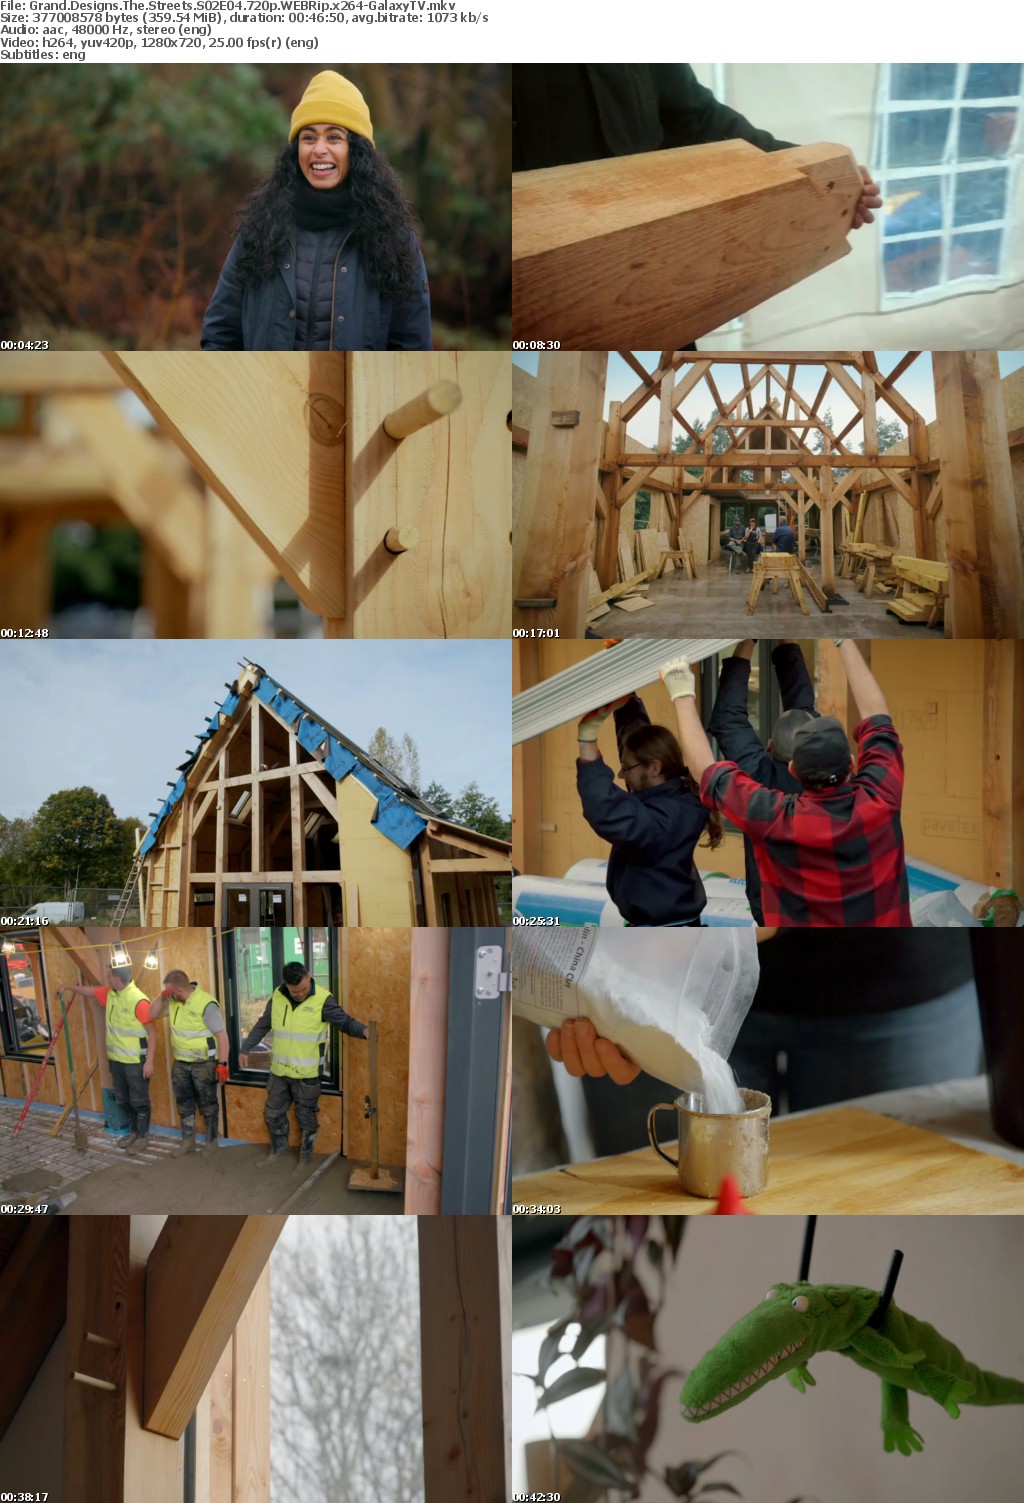 Grand Designs The Streets S02 COMPLETE 720p WEBRip x264-GalaxyTV